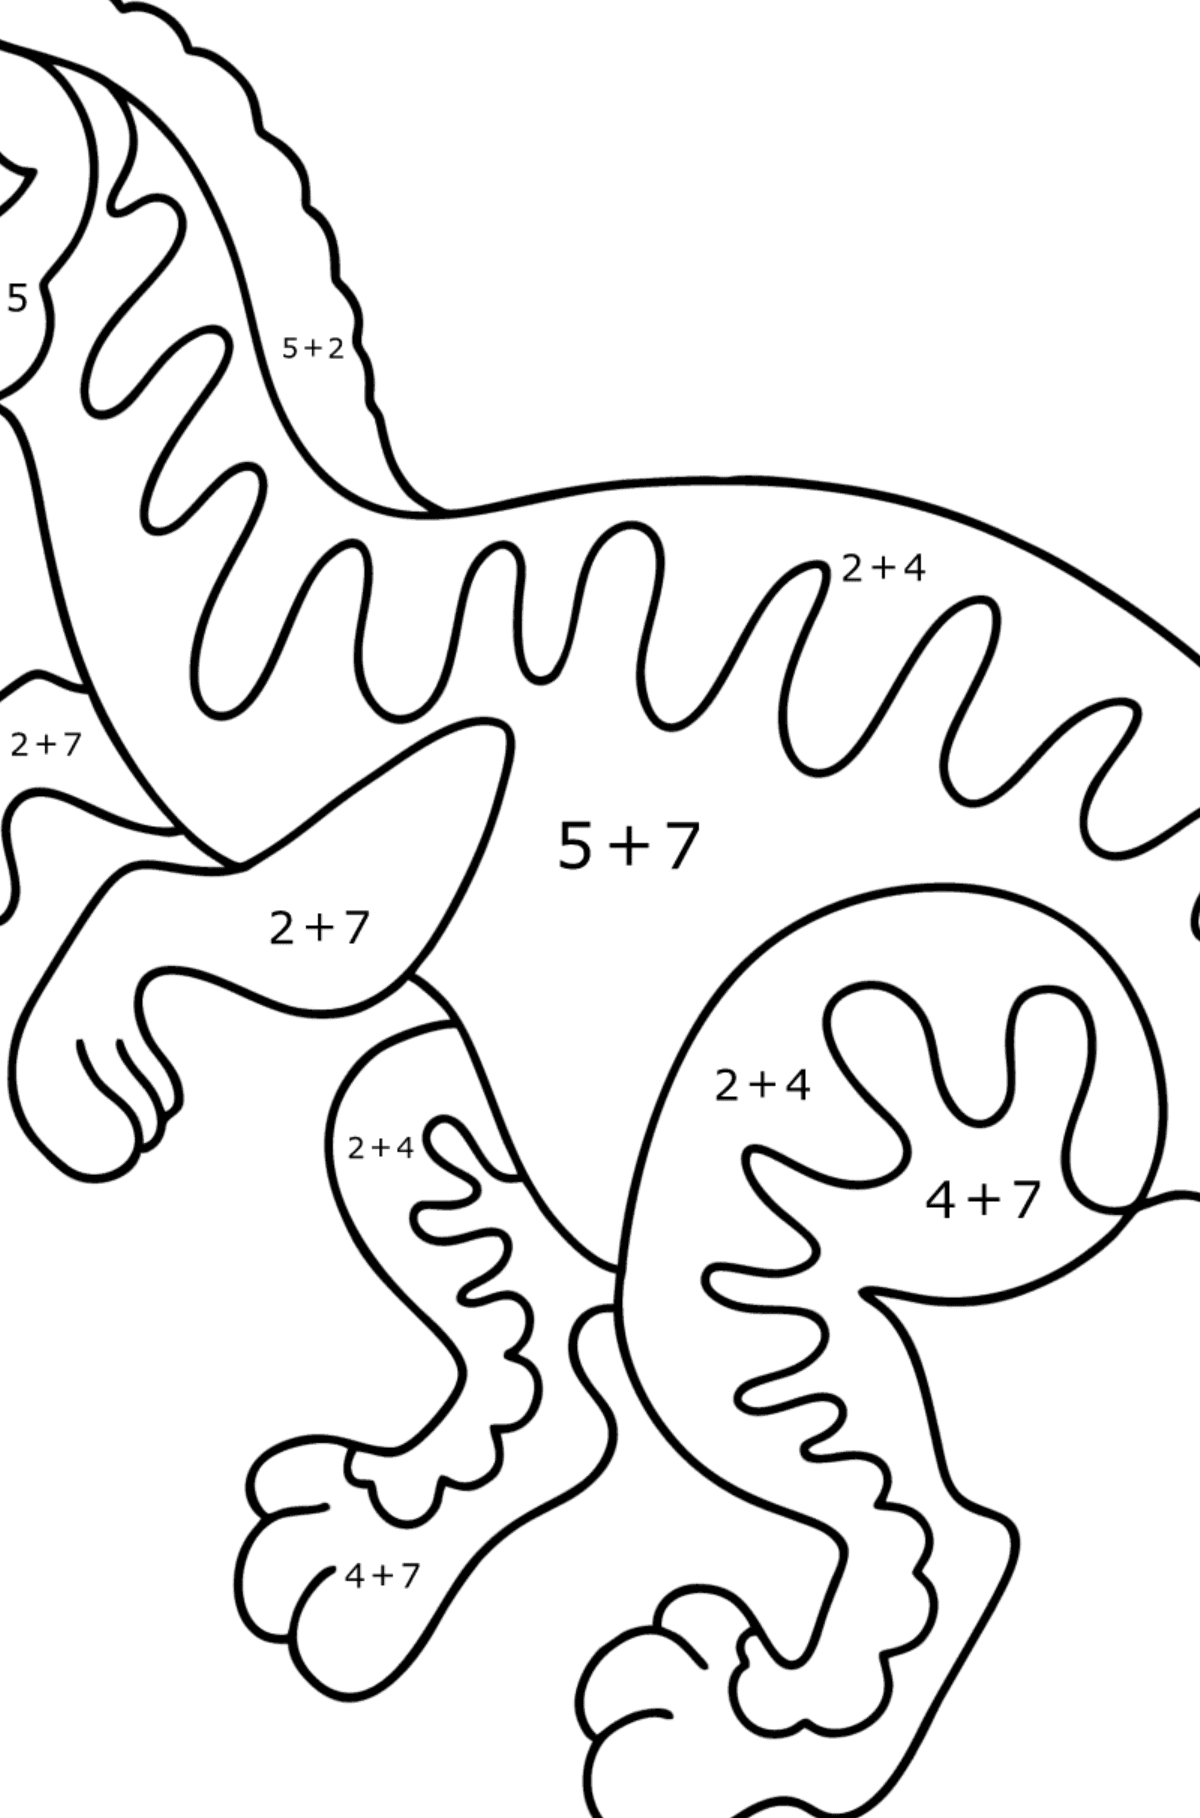 Velociraptor coloring page - Math Coloring - Addition for Kids